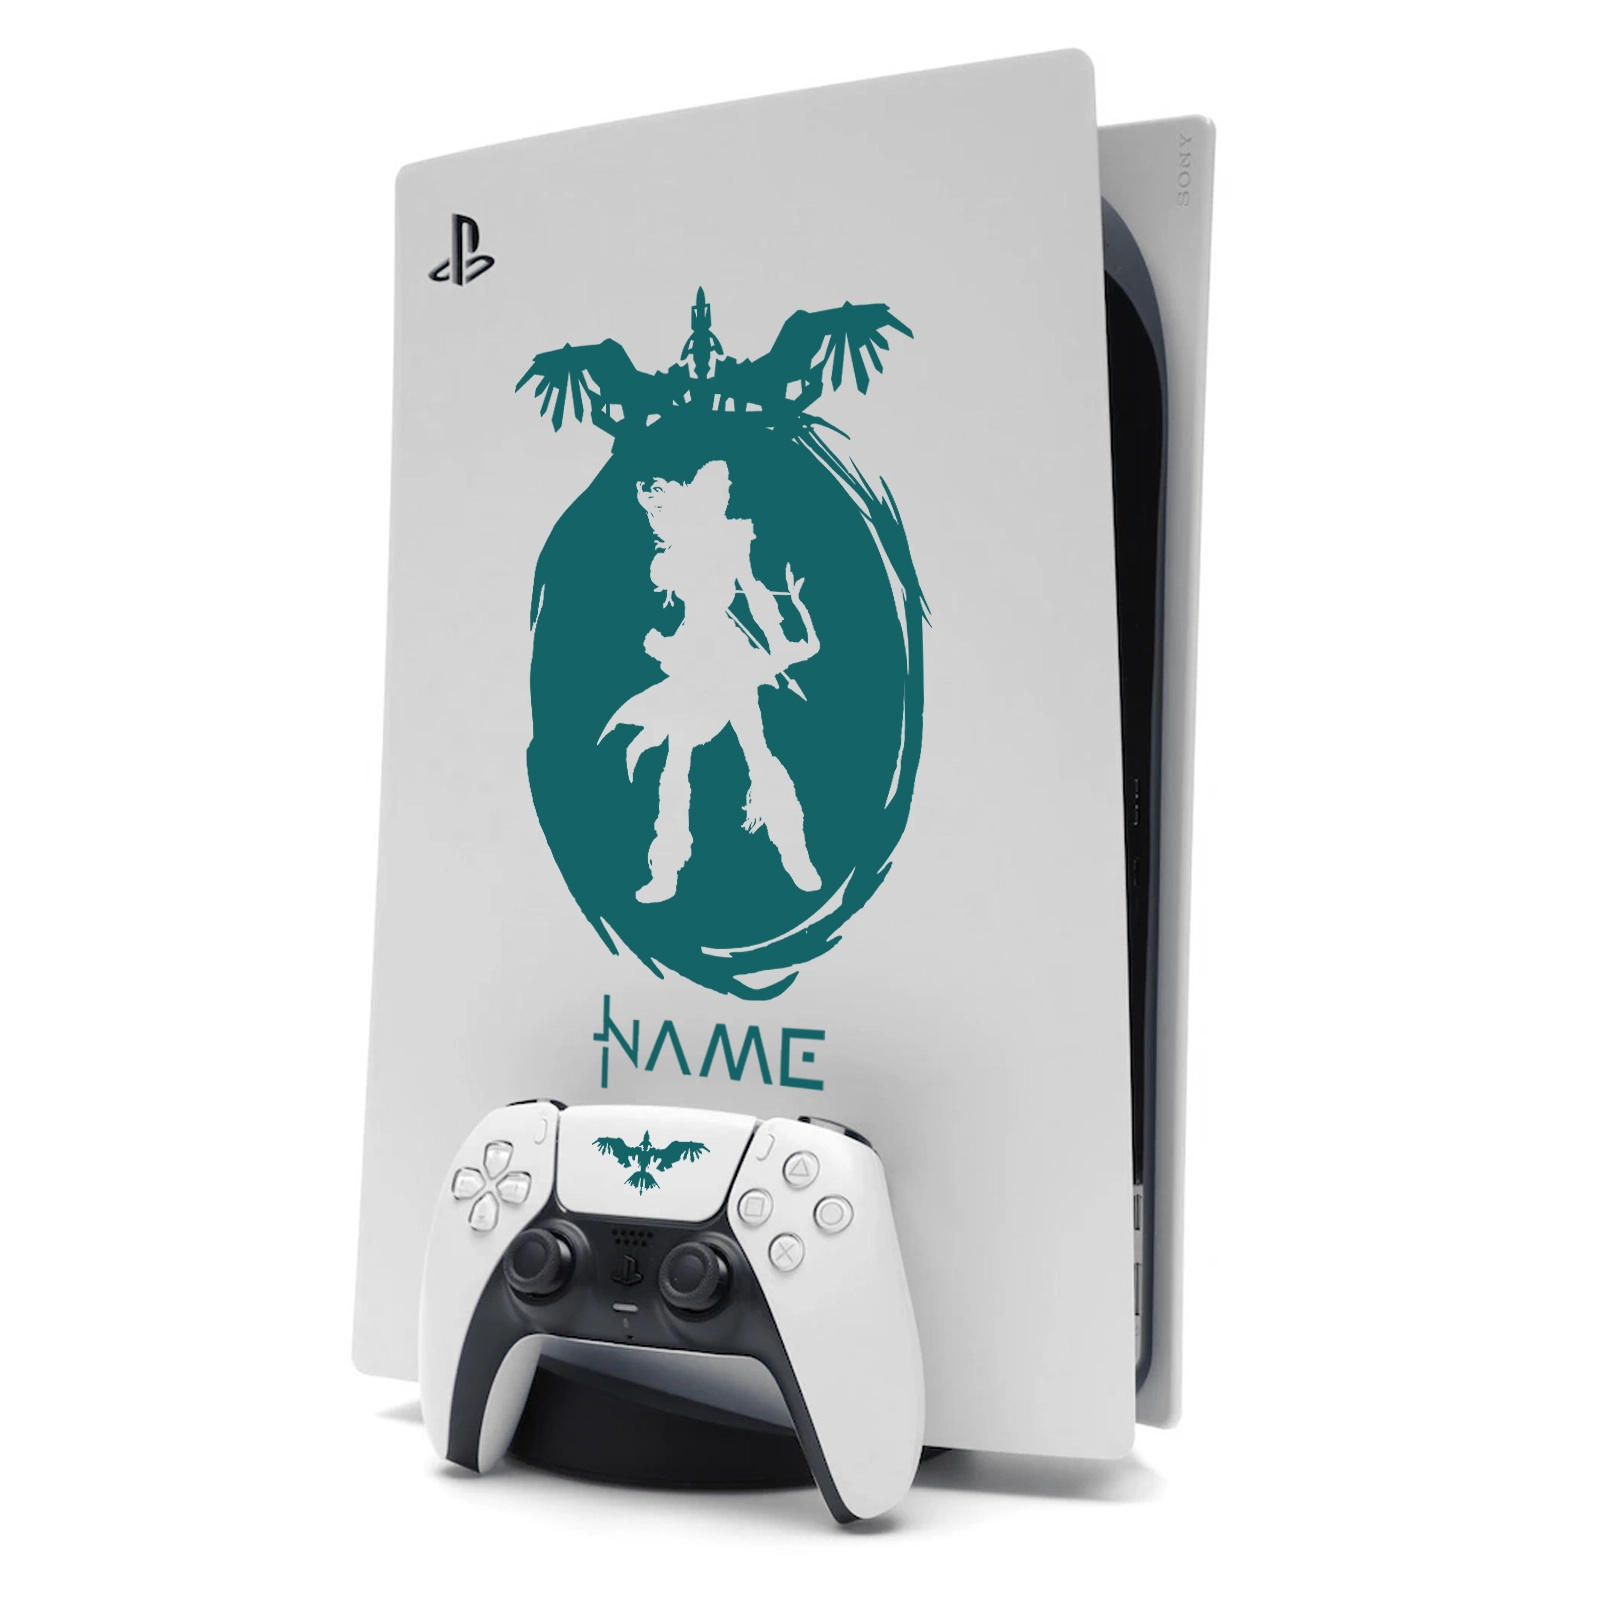 Horizon Aloy PS5 Sticker Skin for Playstation 5 in Teal